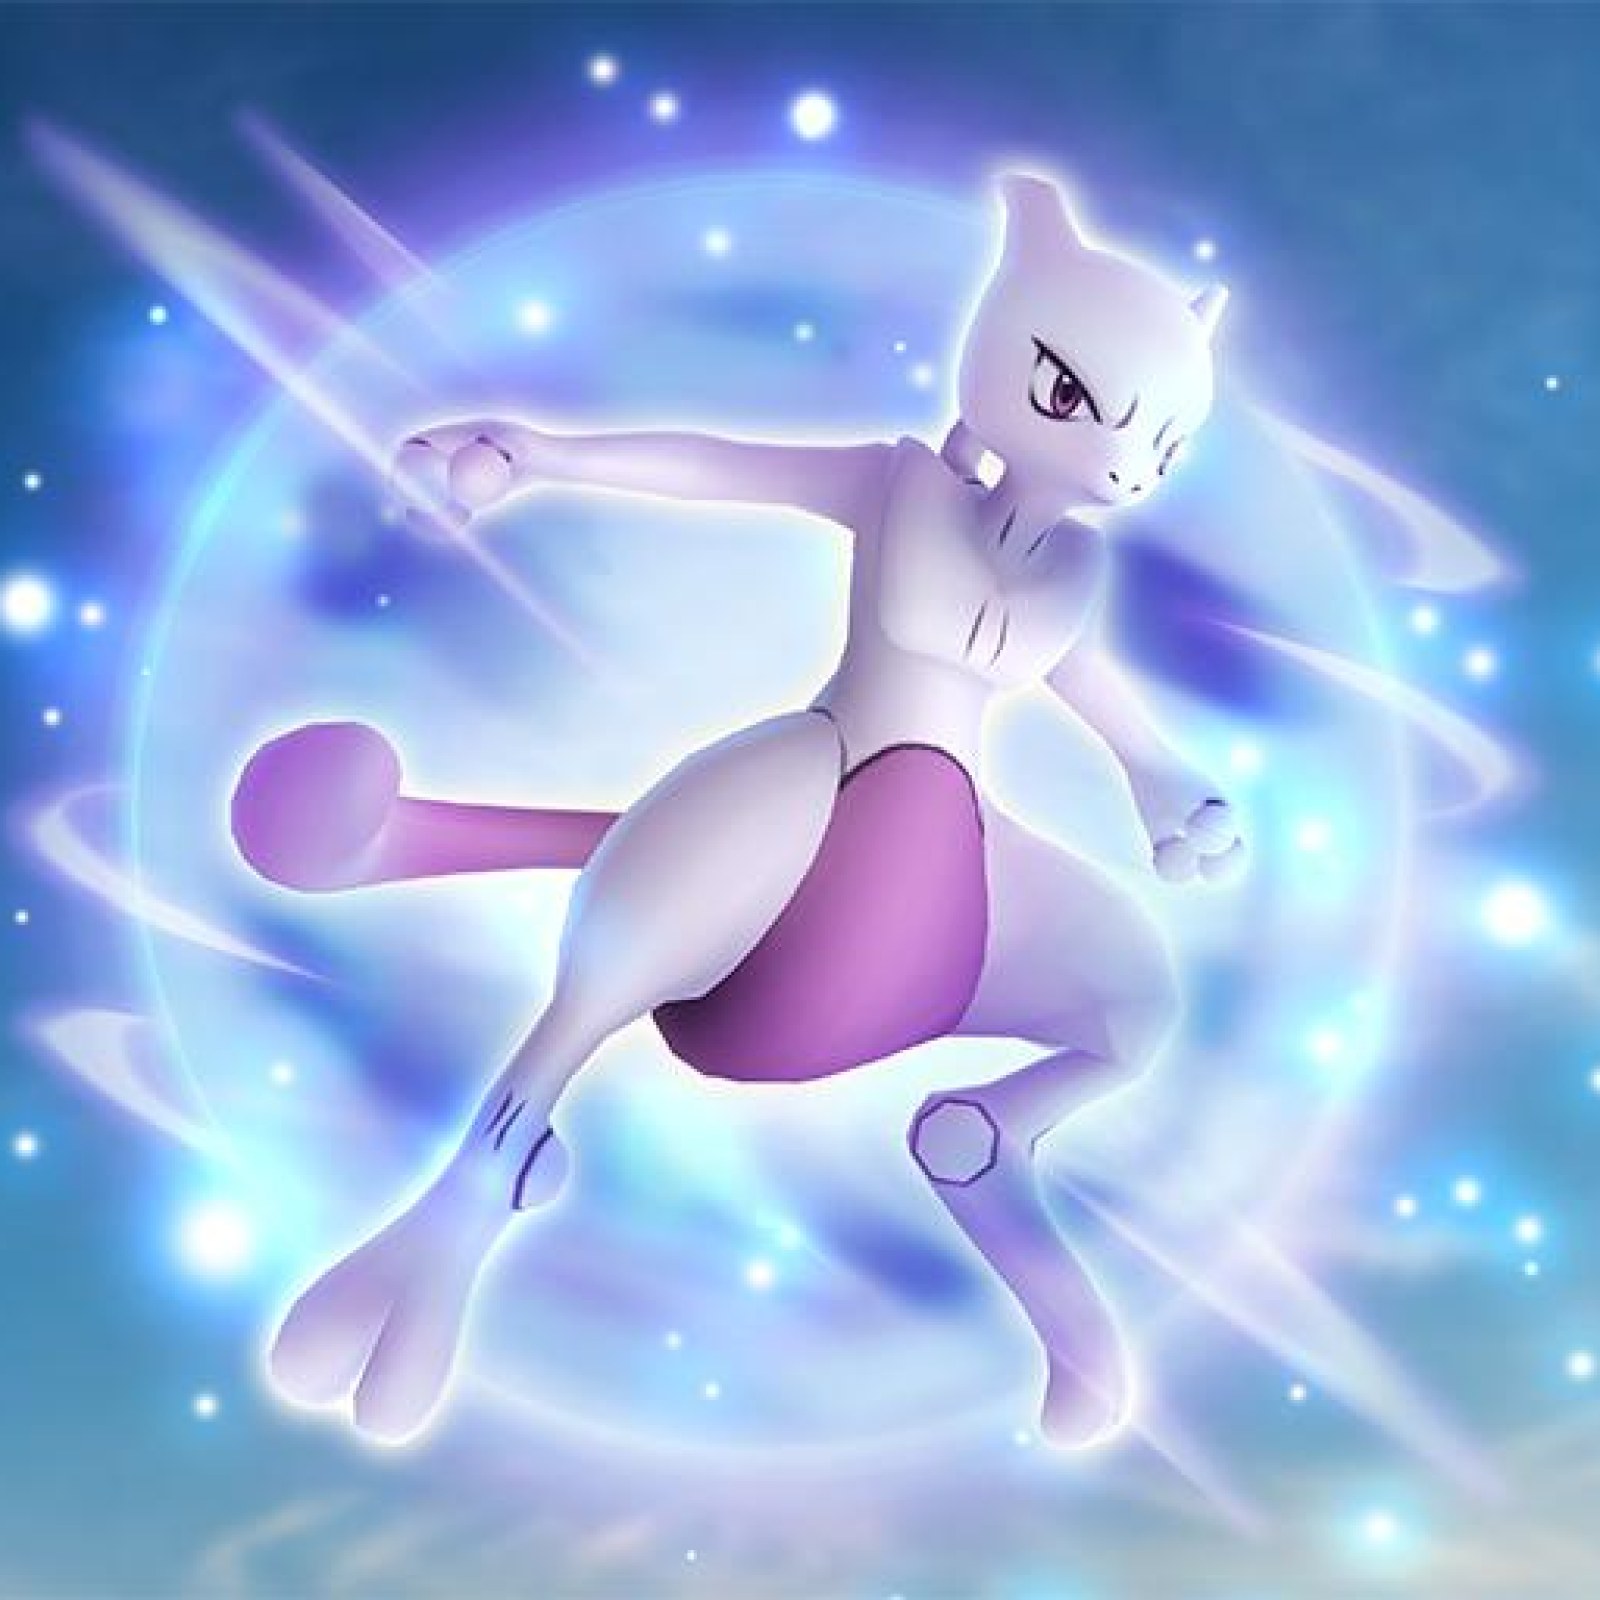 ✨Shiny Mewtwo shows up after only 3 Raids!✨